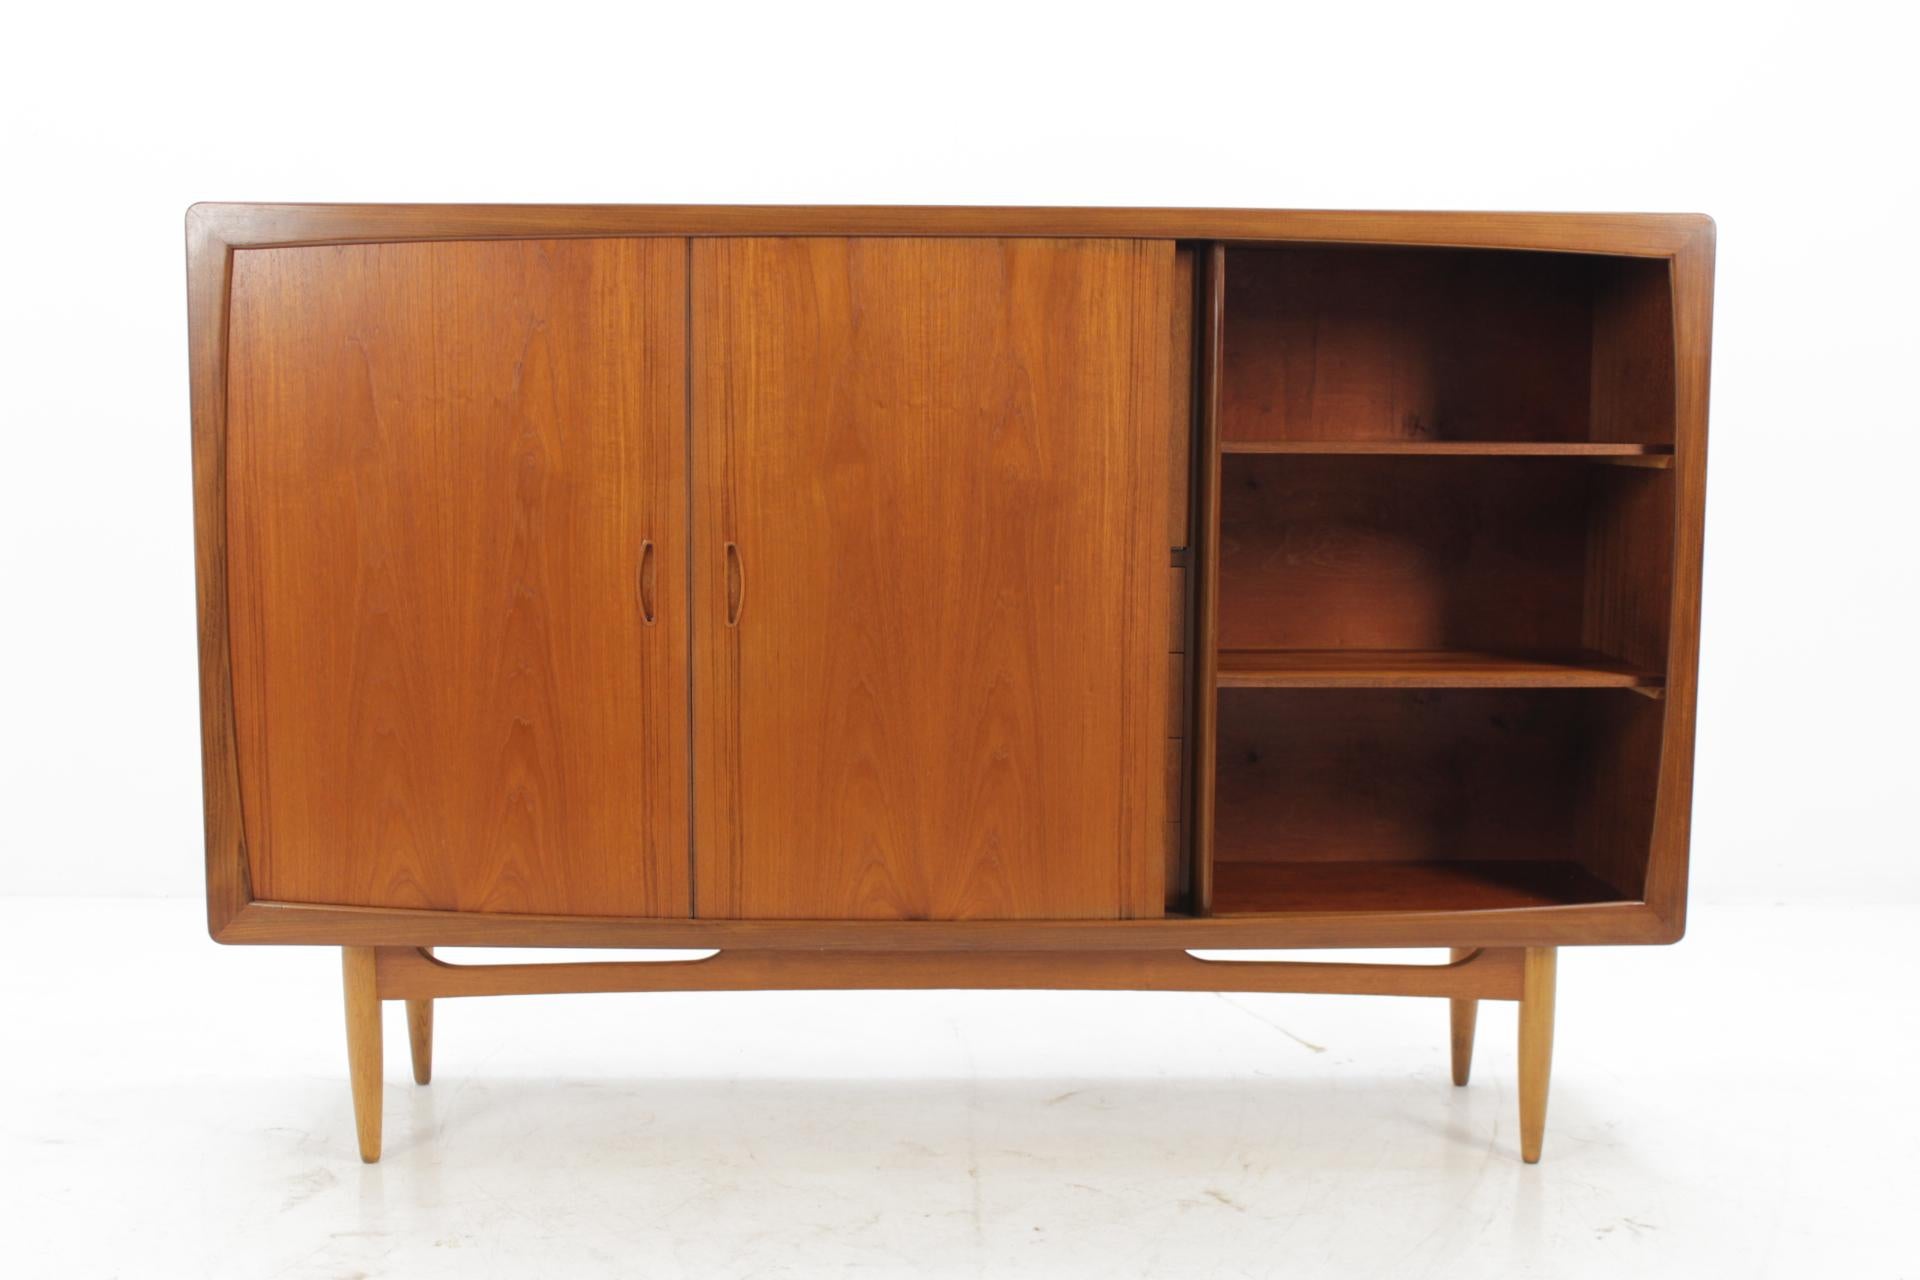 This sideboard features two sliding doors with adjustable shelves and four drawers and one door compartment. This item was carefully restored.